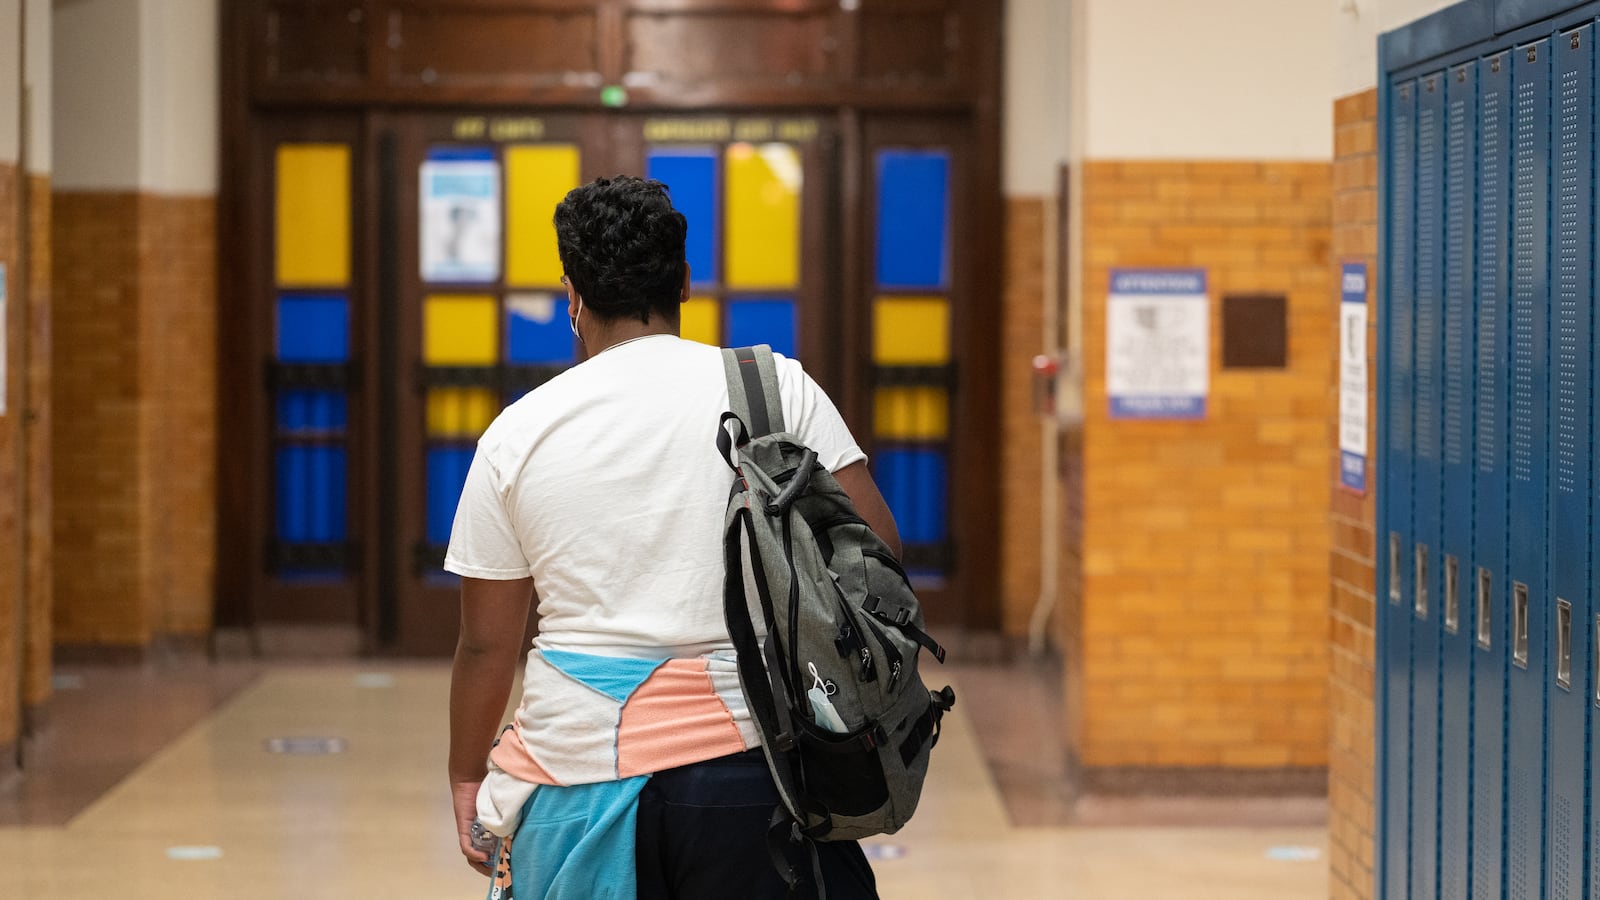 A young man walks through a school hallways, wearing a backpack, white shirt, and blue, pink, and white windbreaker tied around his waist.